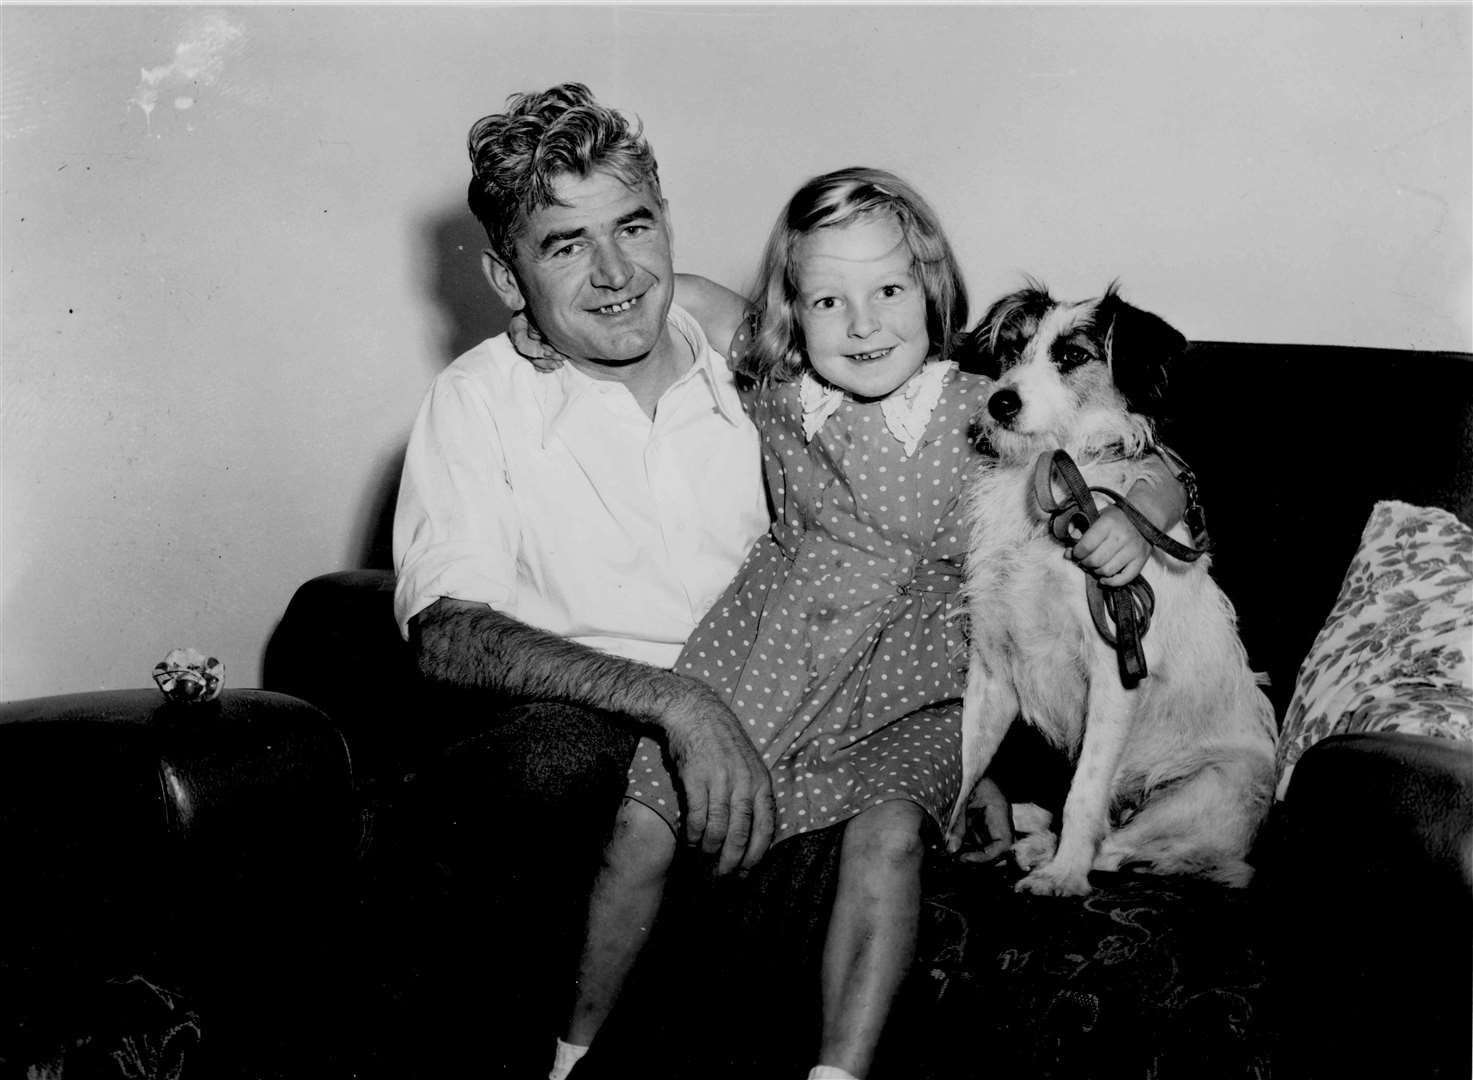 After more than two years in a North Korean prison camp, Signalman Arthur Miles, 35, was back in Barham with his daughter Gladys, six, and her dog, Suzy, in September 1952. He had been taken prisoner at the Battle of Imjin River in 1951 while serving with the Royal Corps of Signals during the Korean War, which began in June 1950 and ended in July 1953